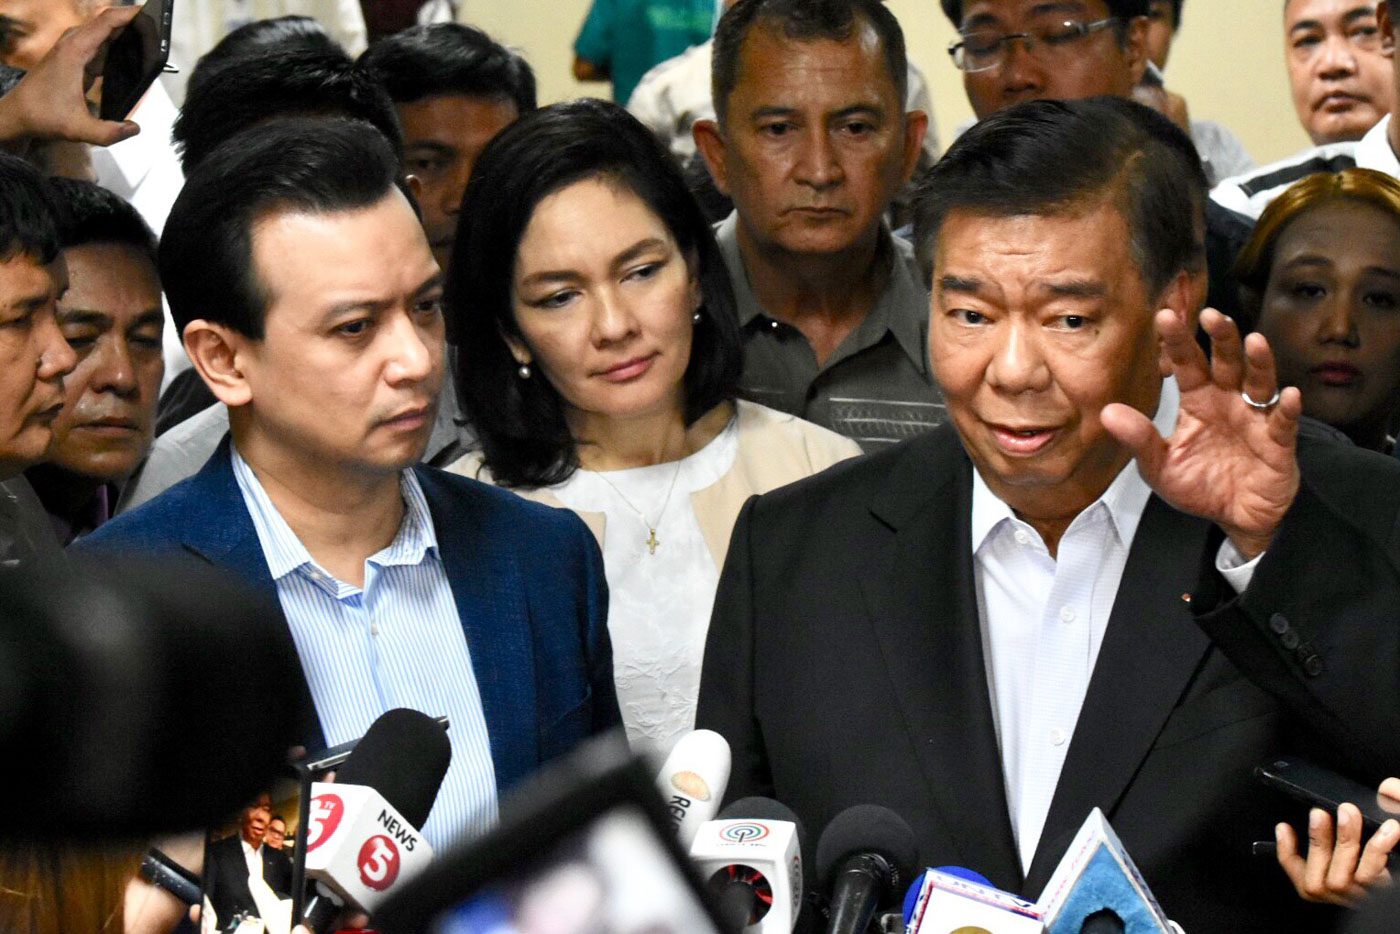 AMNESTY REVOKED. Senator Antonio Trillanes IV (L) faces the media regarding the arrest order on him following the revocation of his amnesty. Senate President Vicente Sotto III did not allow the arrest of Trillanes inside the Senate premises. Photo by Angie de Silva/Rappler   